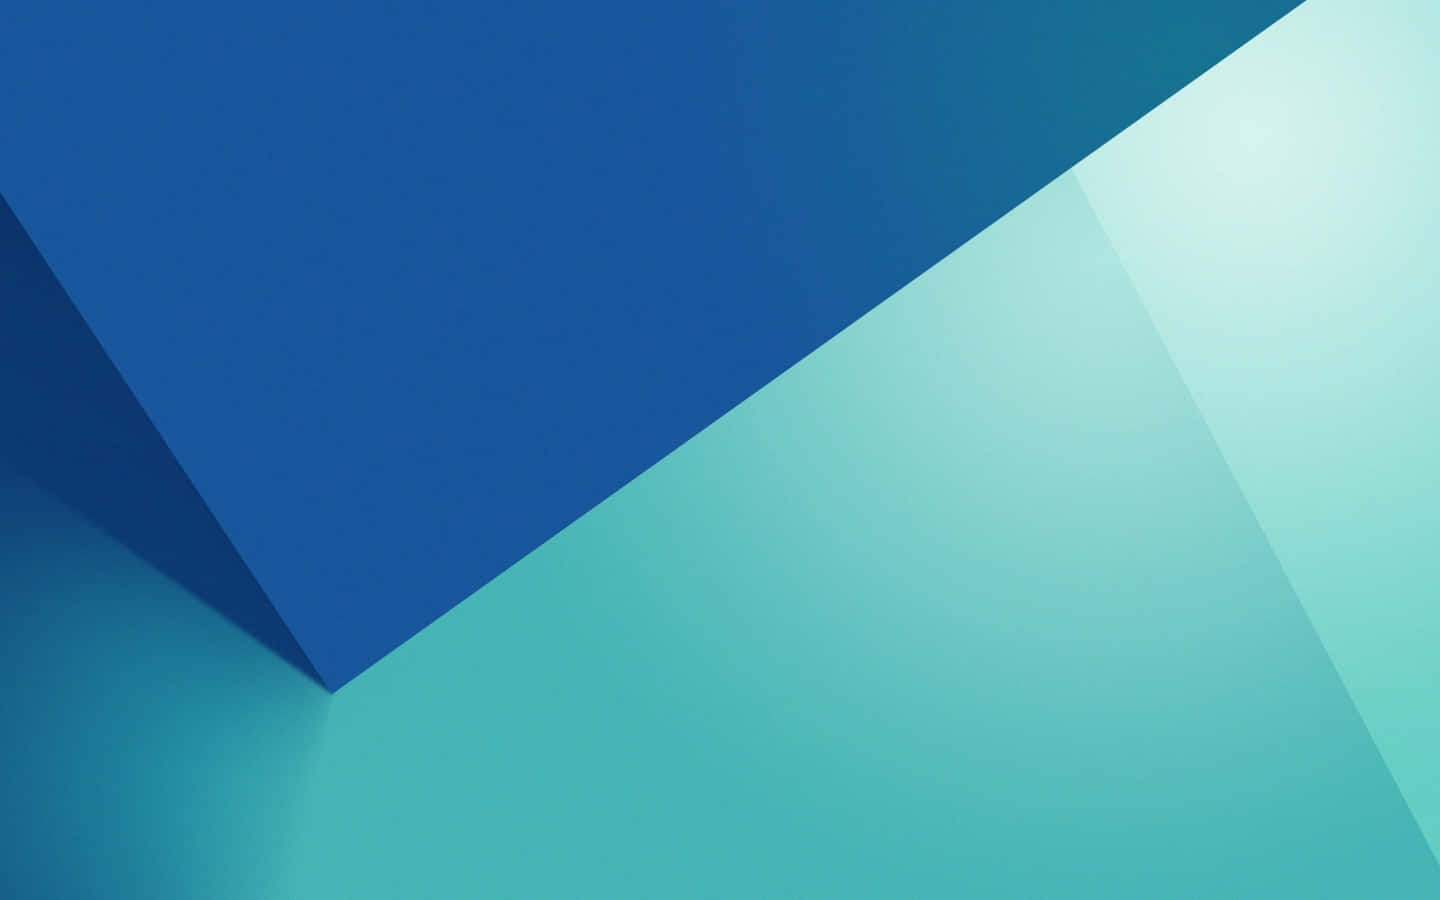 Simplicity and Beauty in Material Design